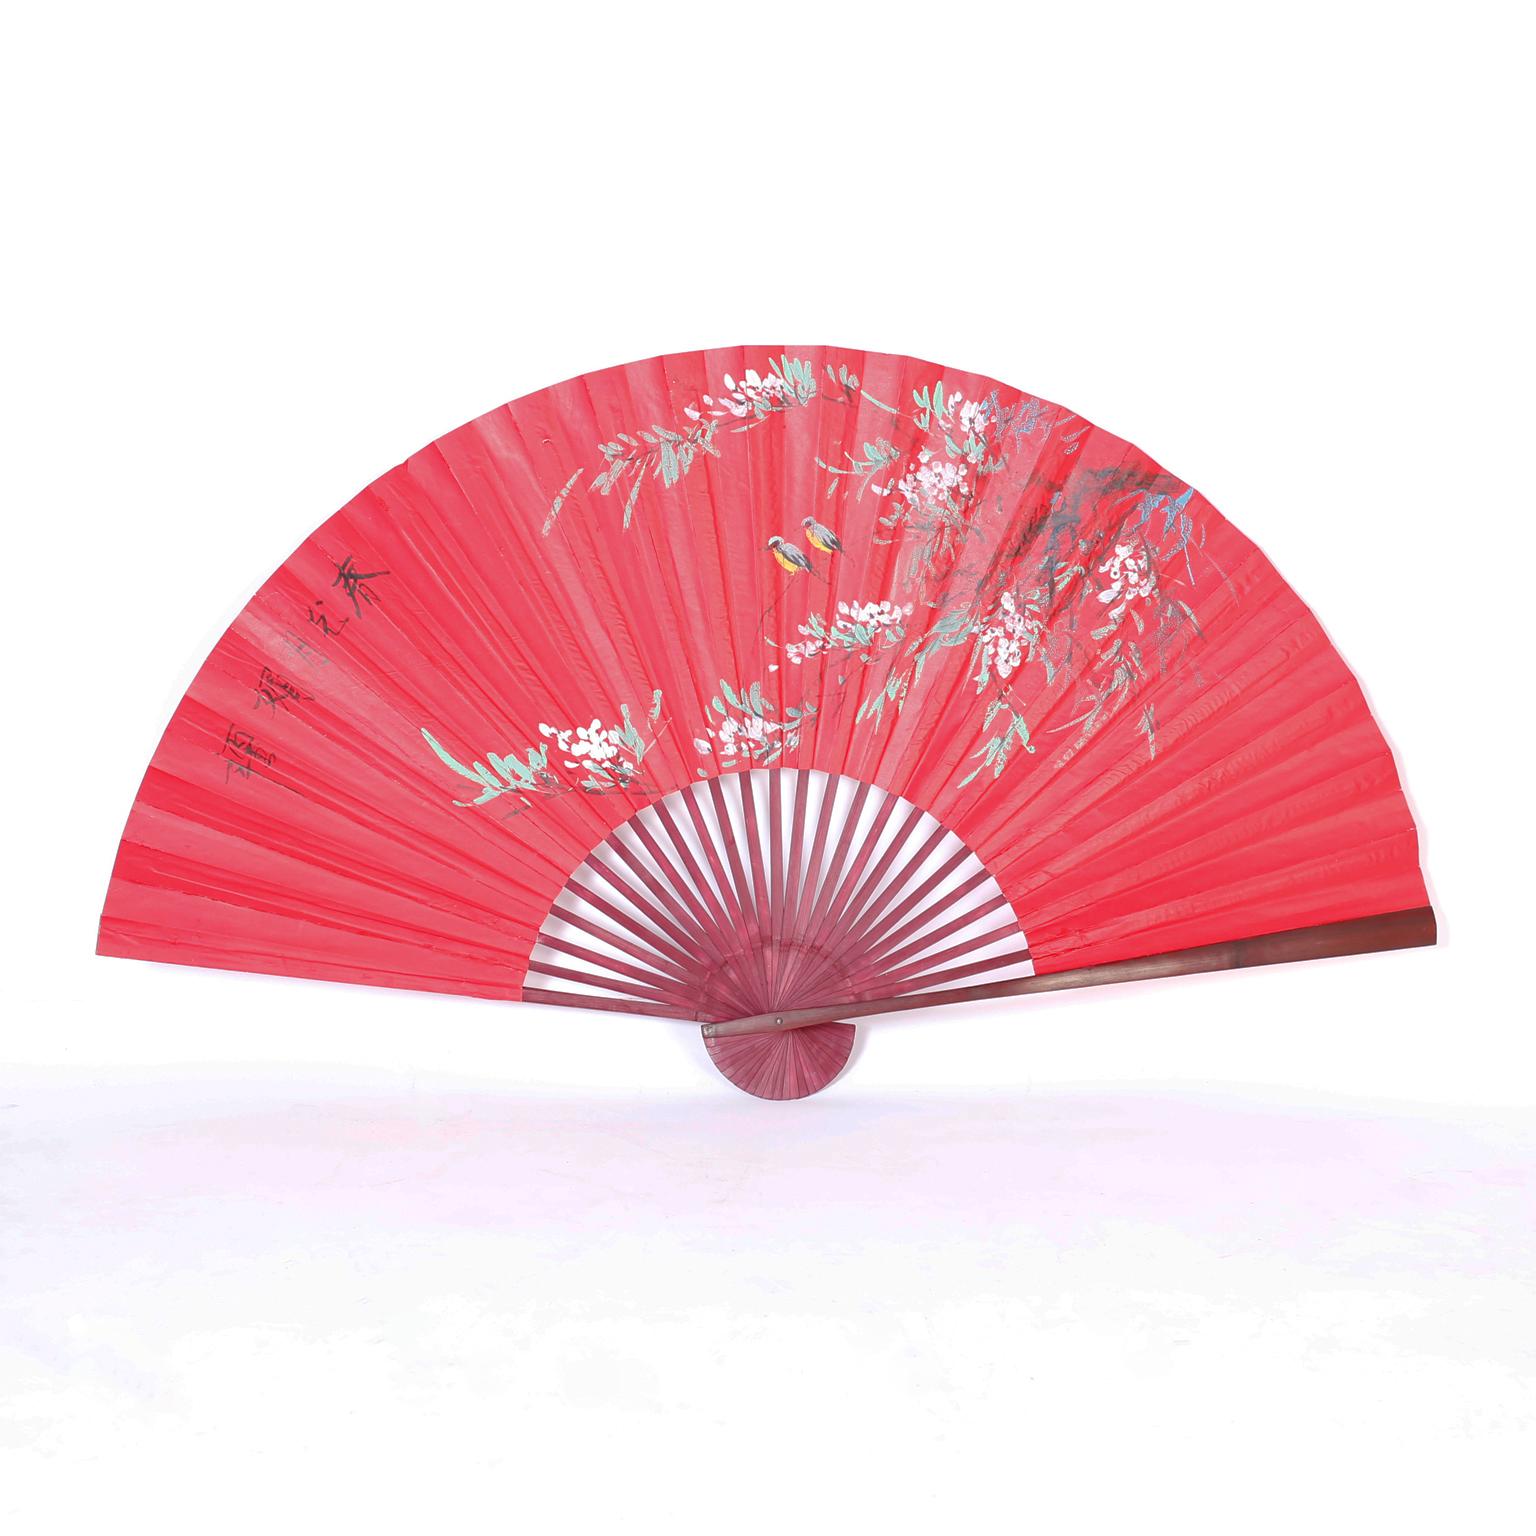 Two large decorative mid century Japanese fans crafted with wood frames and paper. The red fan is hand painted with characters and a lovely scene of two birds in a tree. Both have hooks on the back for easy wall hanging. Priced individually. 

Red